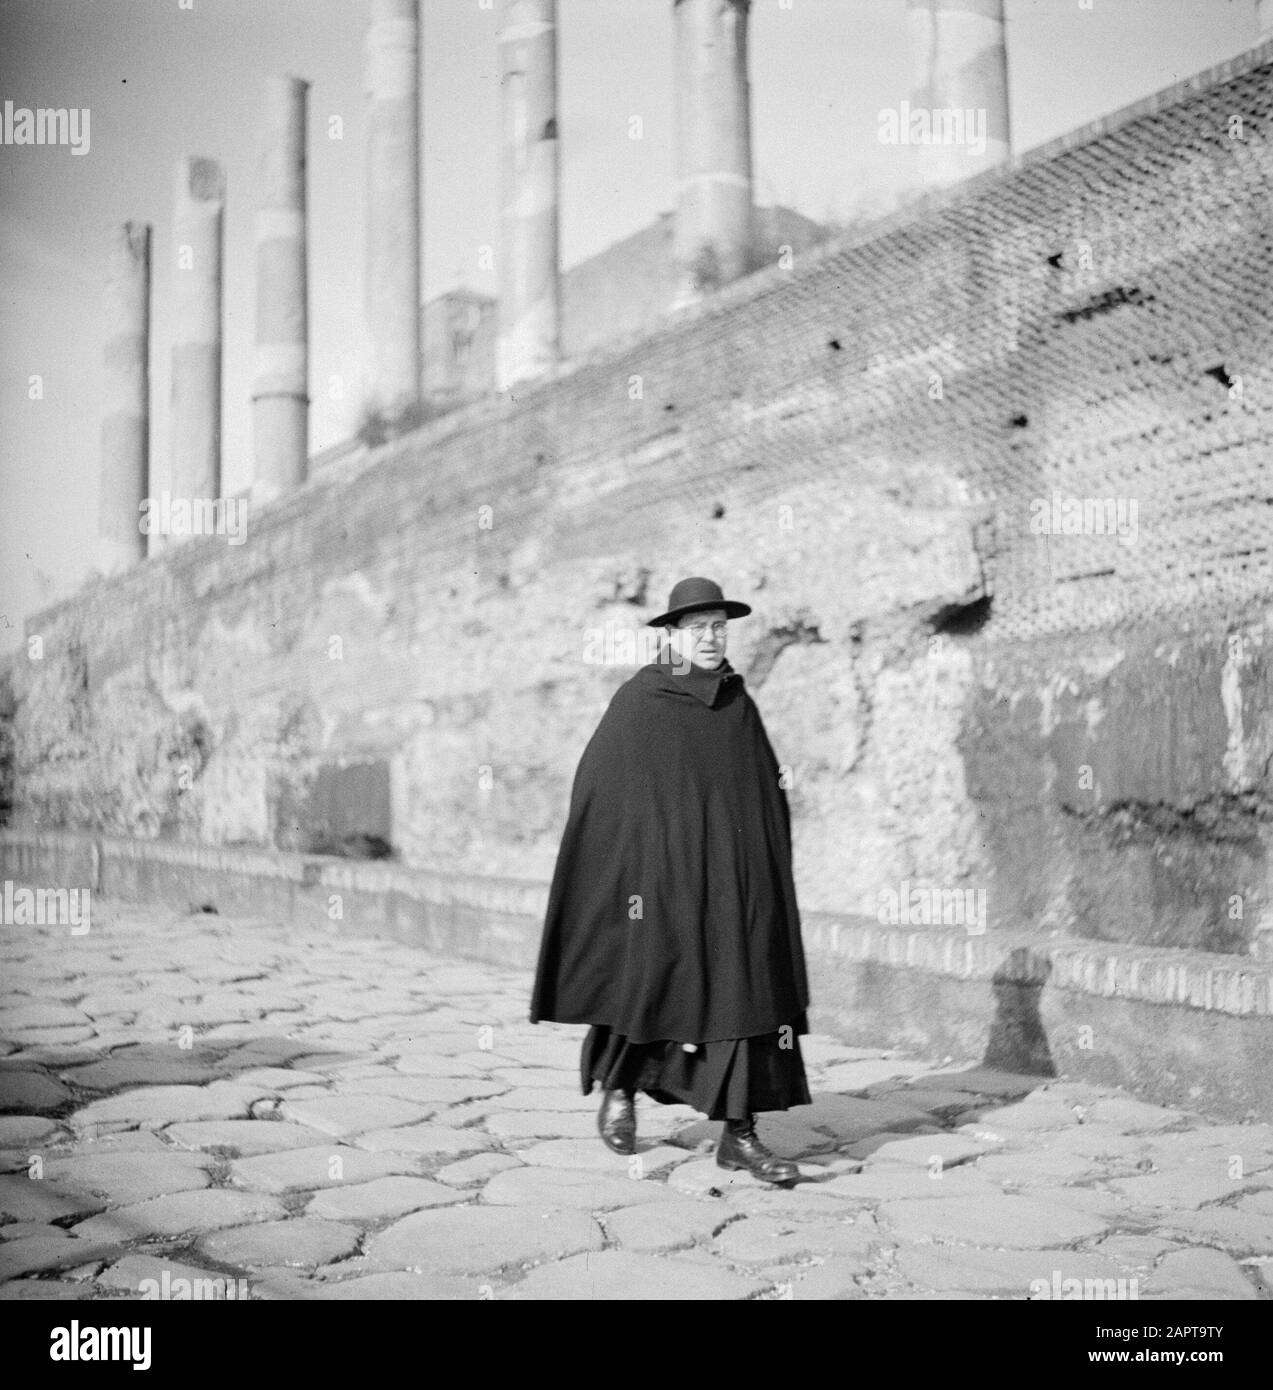 Rome: Visit to the city  Spiritual in a street near the Roman Forum Date: December 1937 Location: Italy, Rome Keywords: archeology, architecture, clergy, headcovers, Catholicism, pillars, ruins, street statues, uniforms Stock Photo